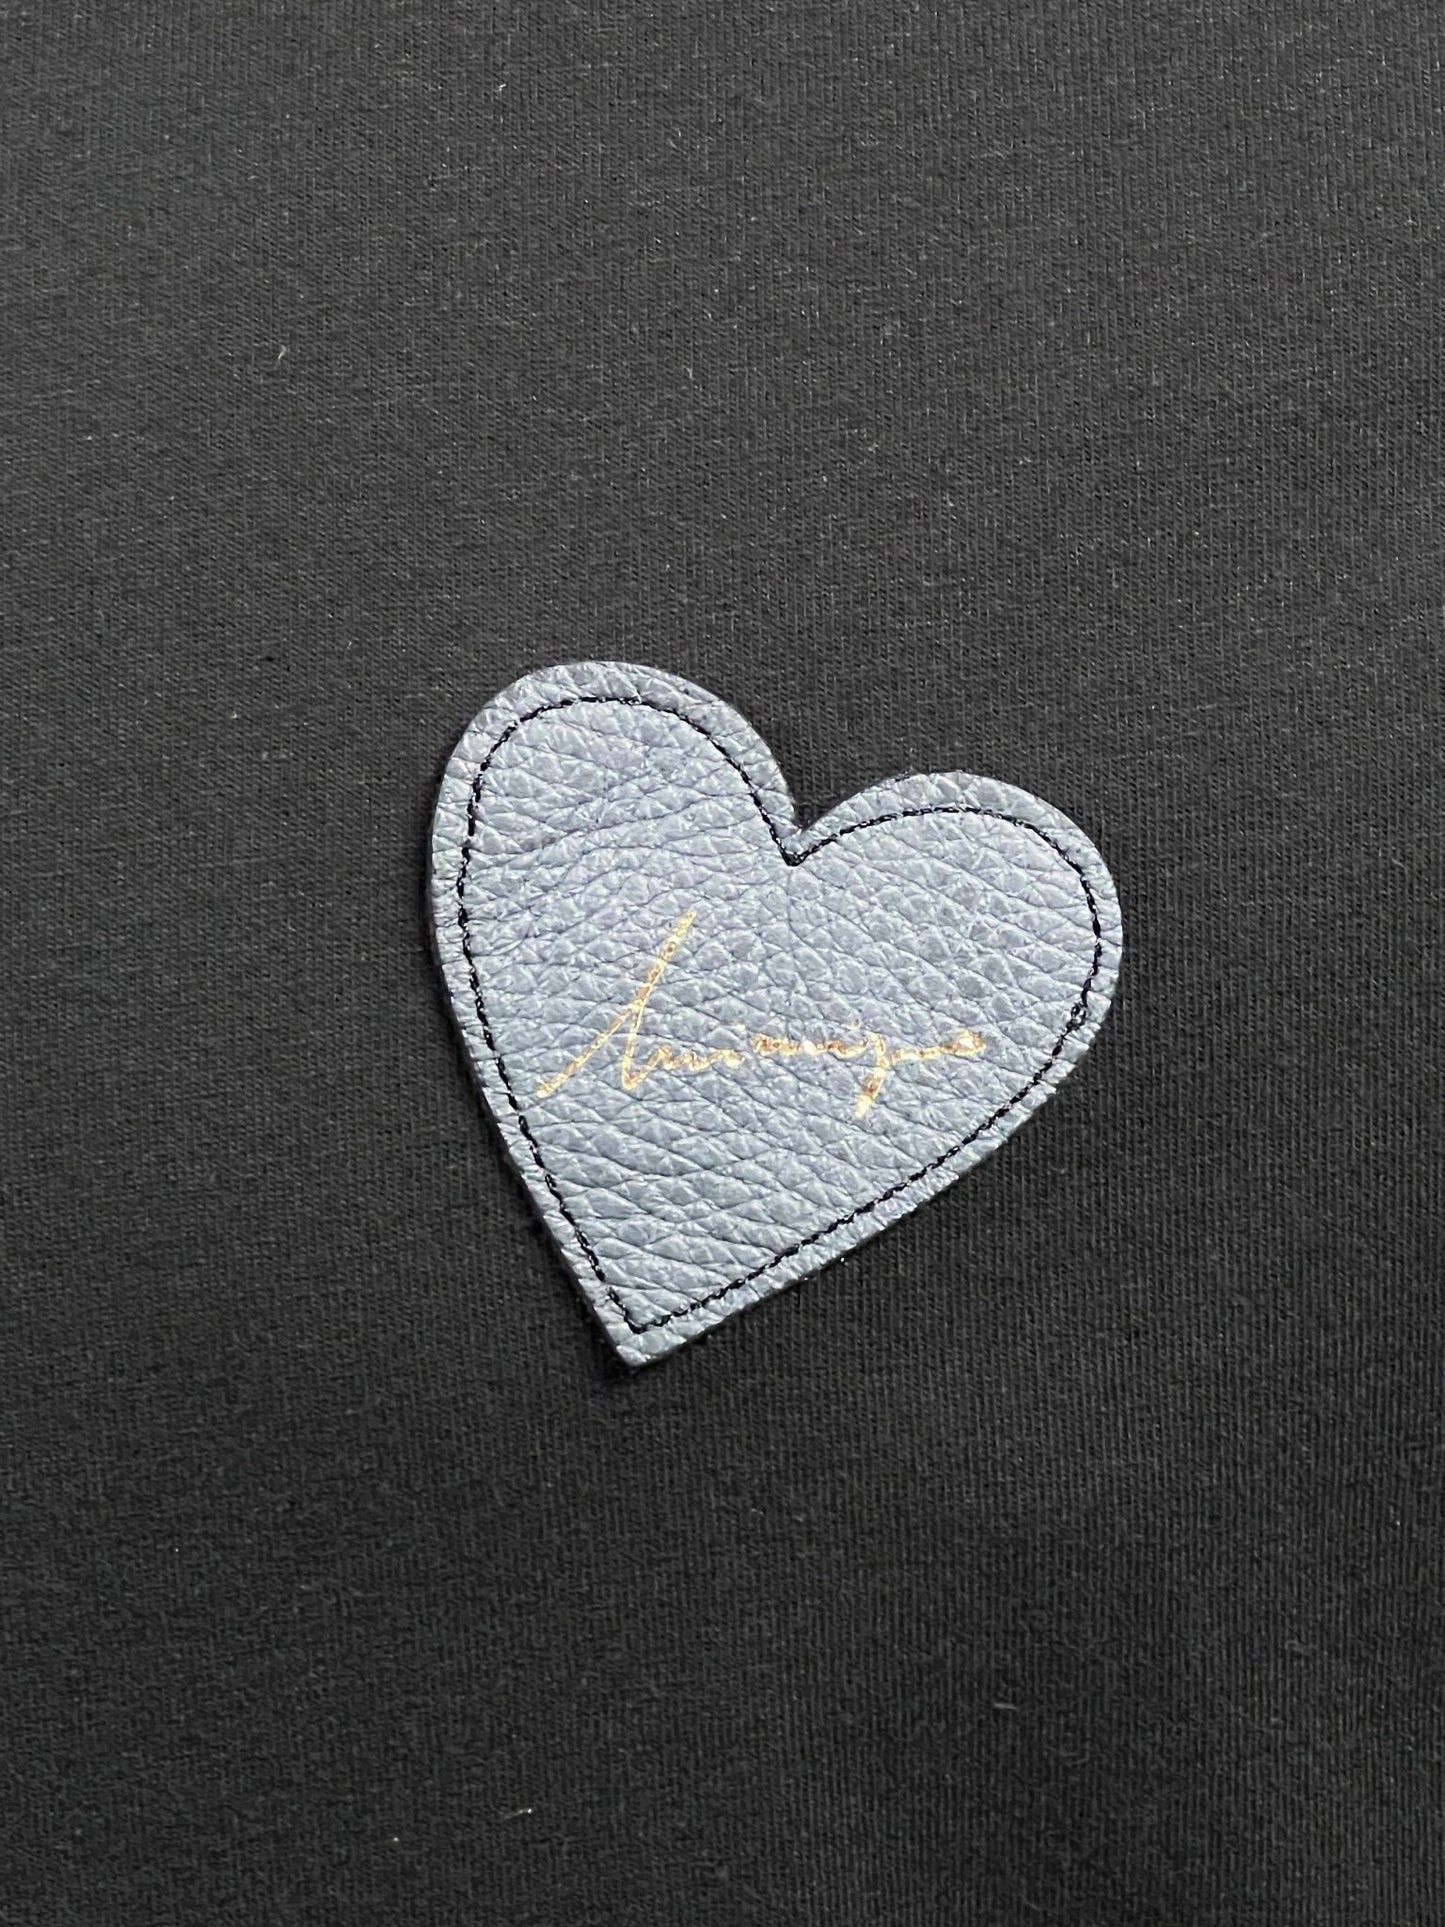 A gray heart-shaped patch with a signature in gold is sewn onto 100% cotton black fabric, adding a touch of elegance to the INIMIGO ITS3508 HEART PATCH T-SHIRT BLACK.